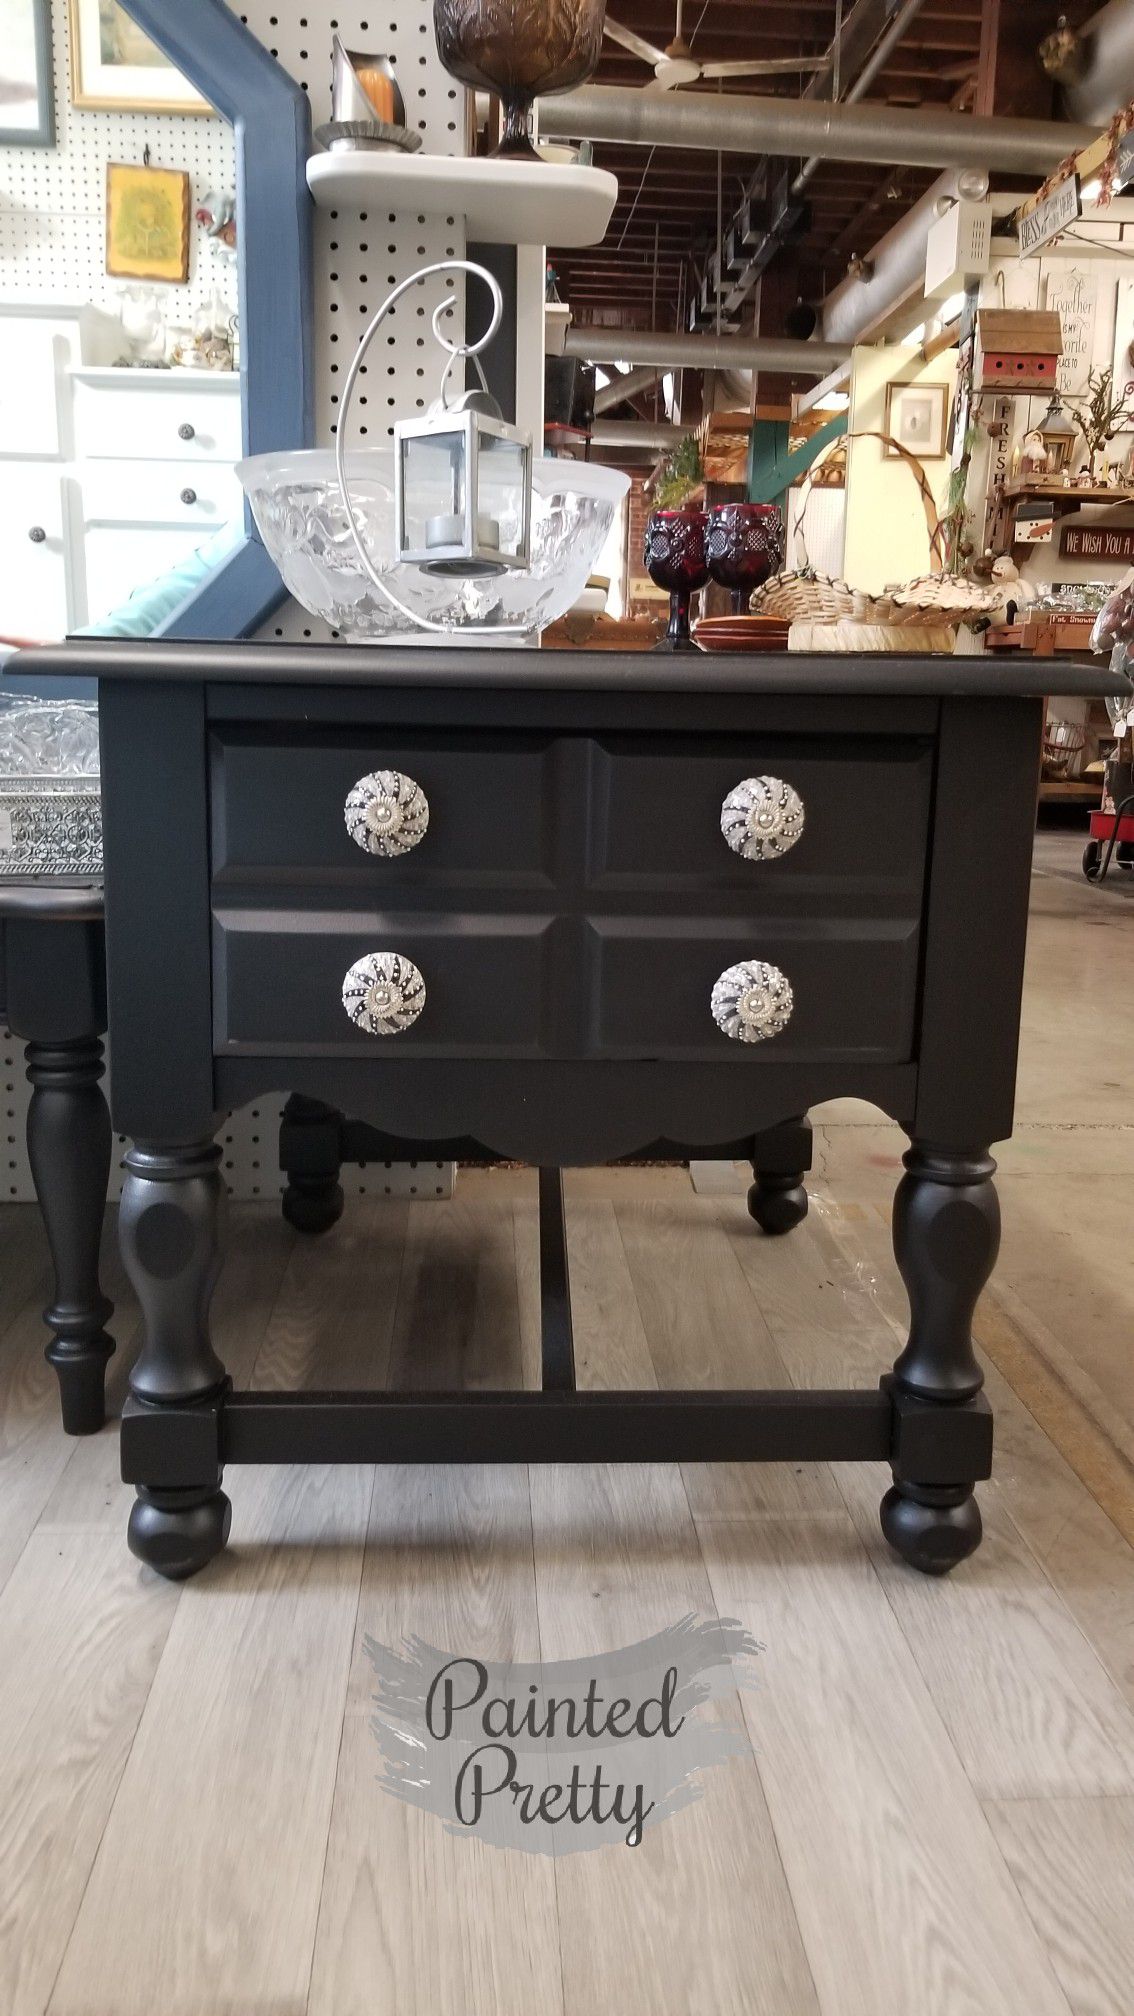 Black end table with decorative drawer pulls